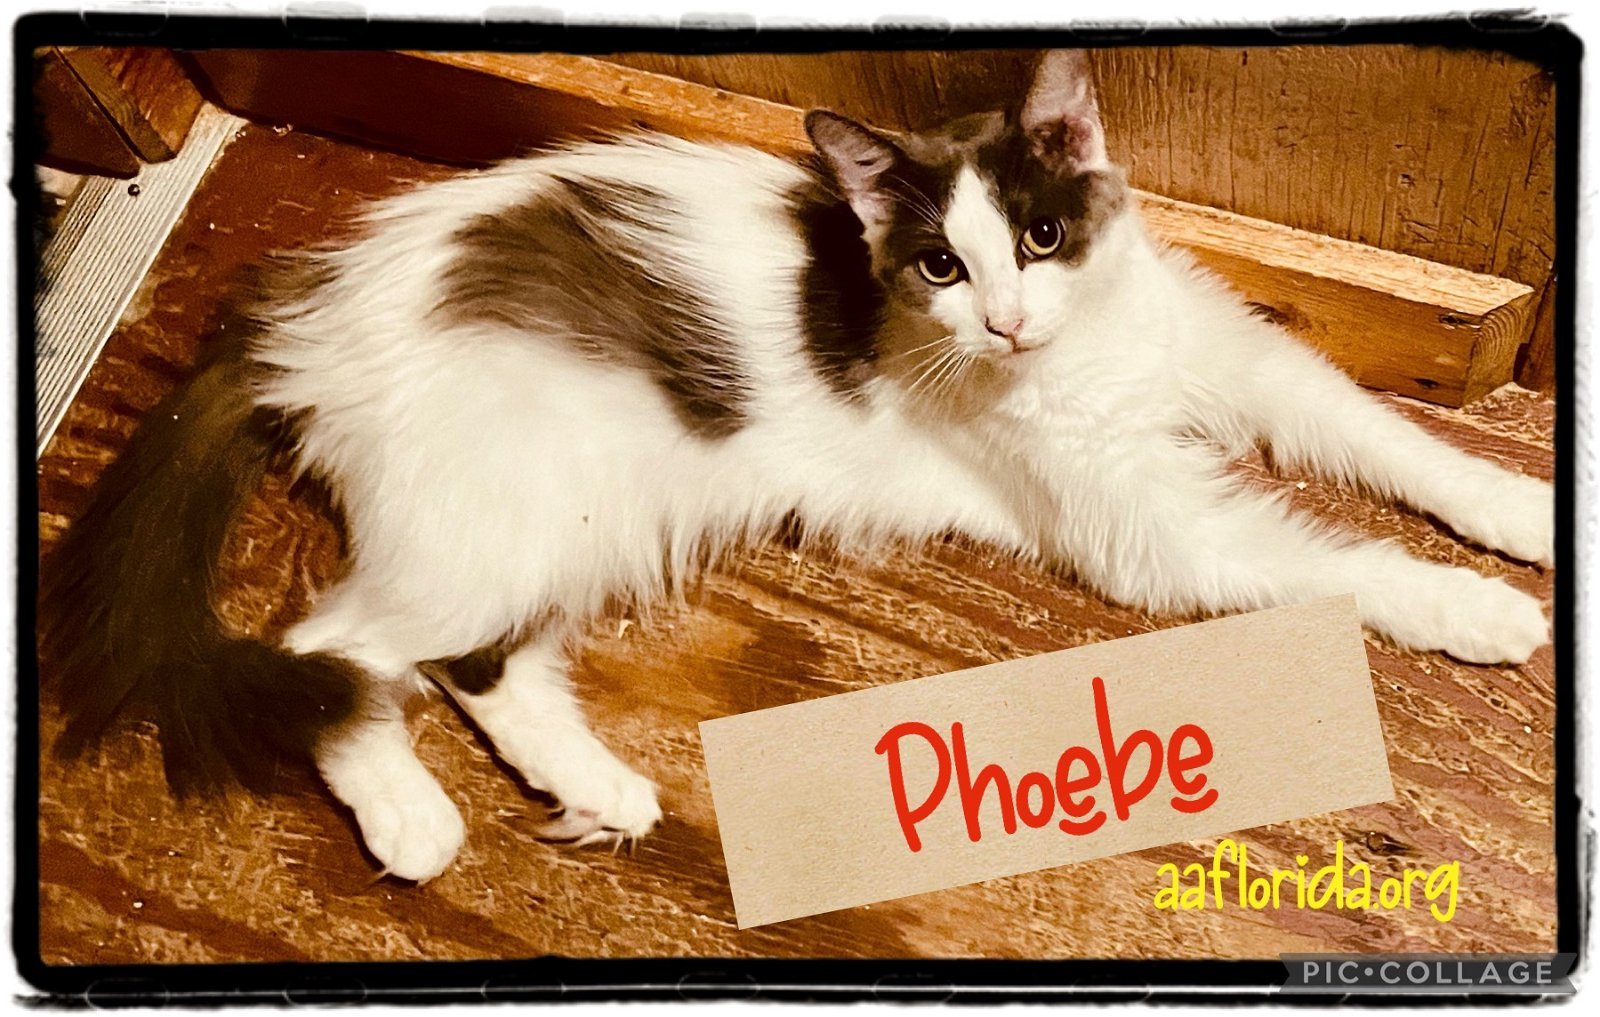 Phoebe detail page